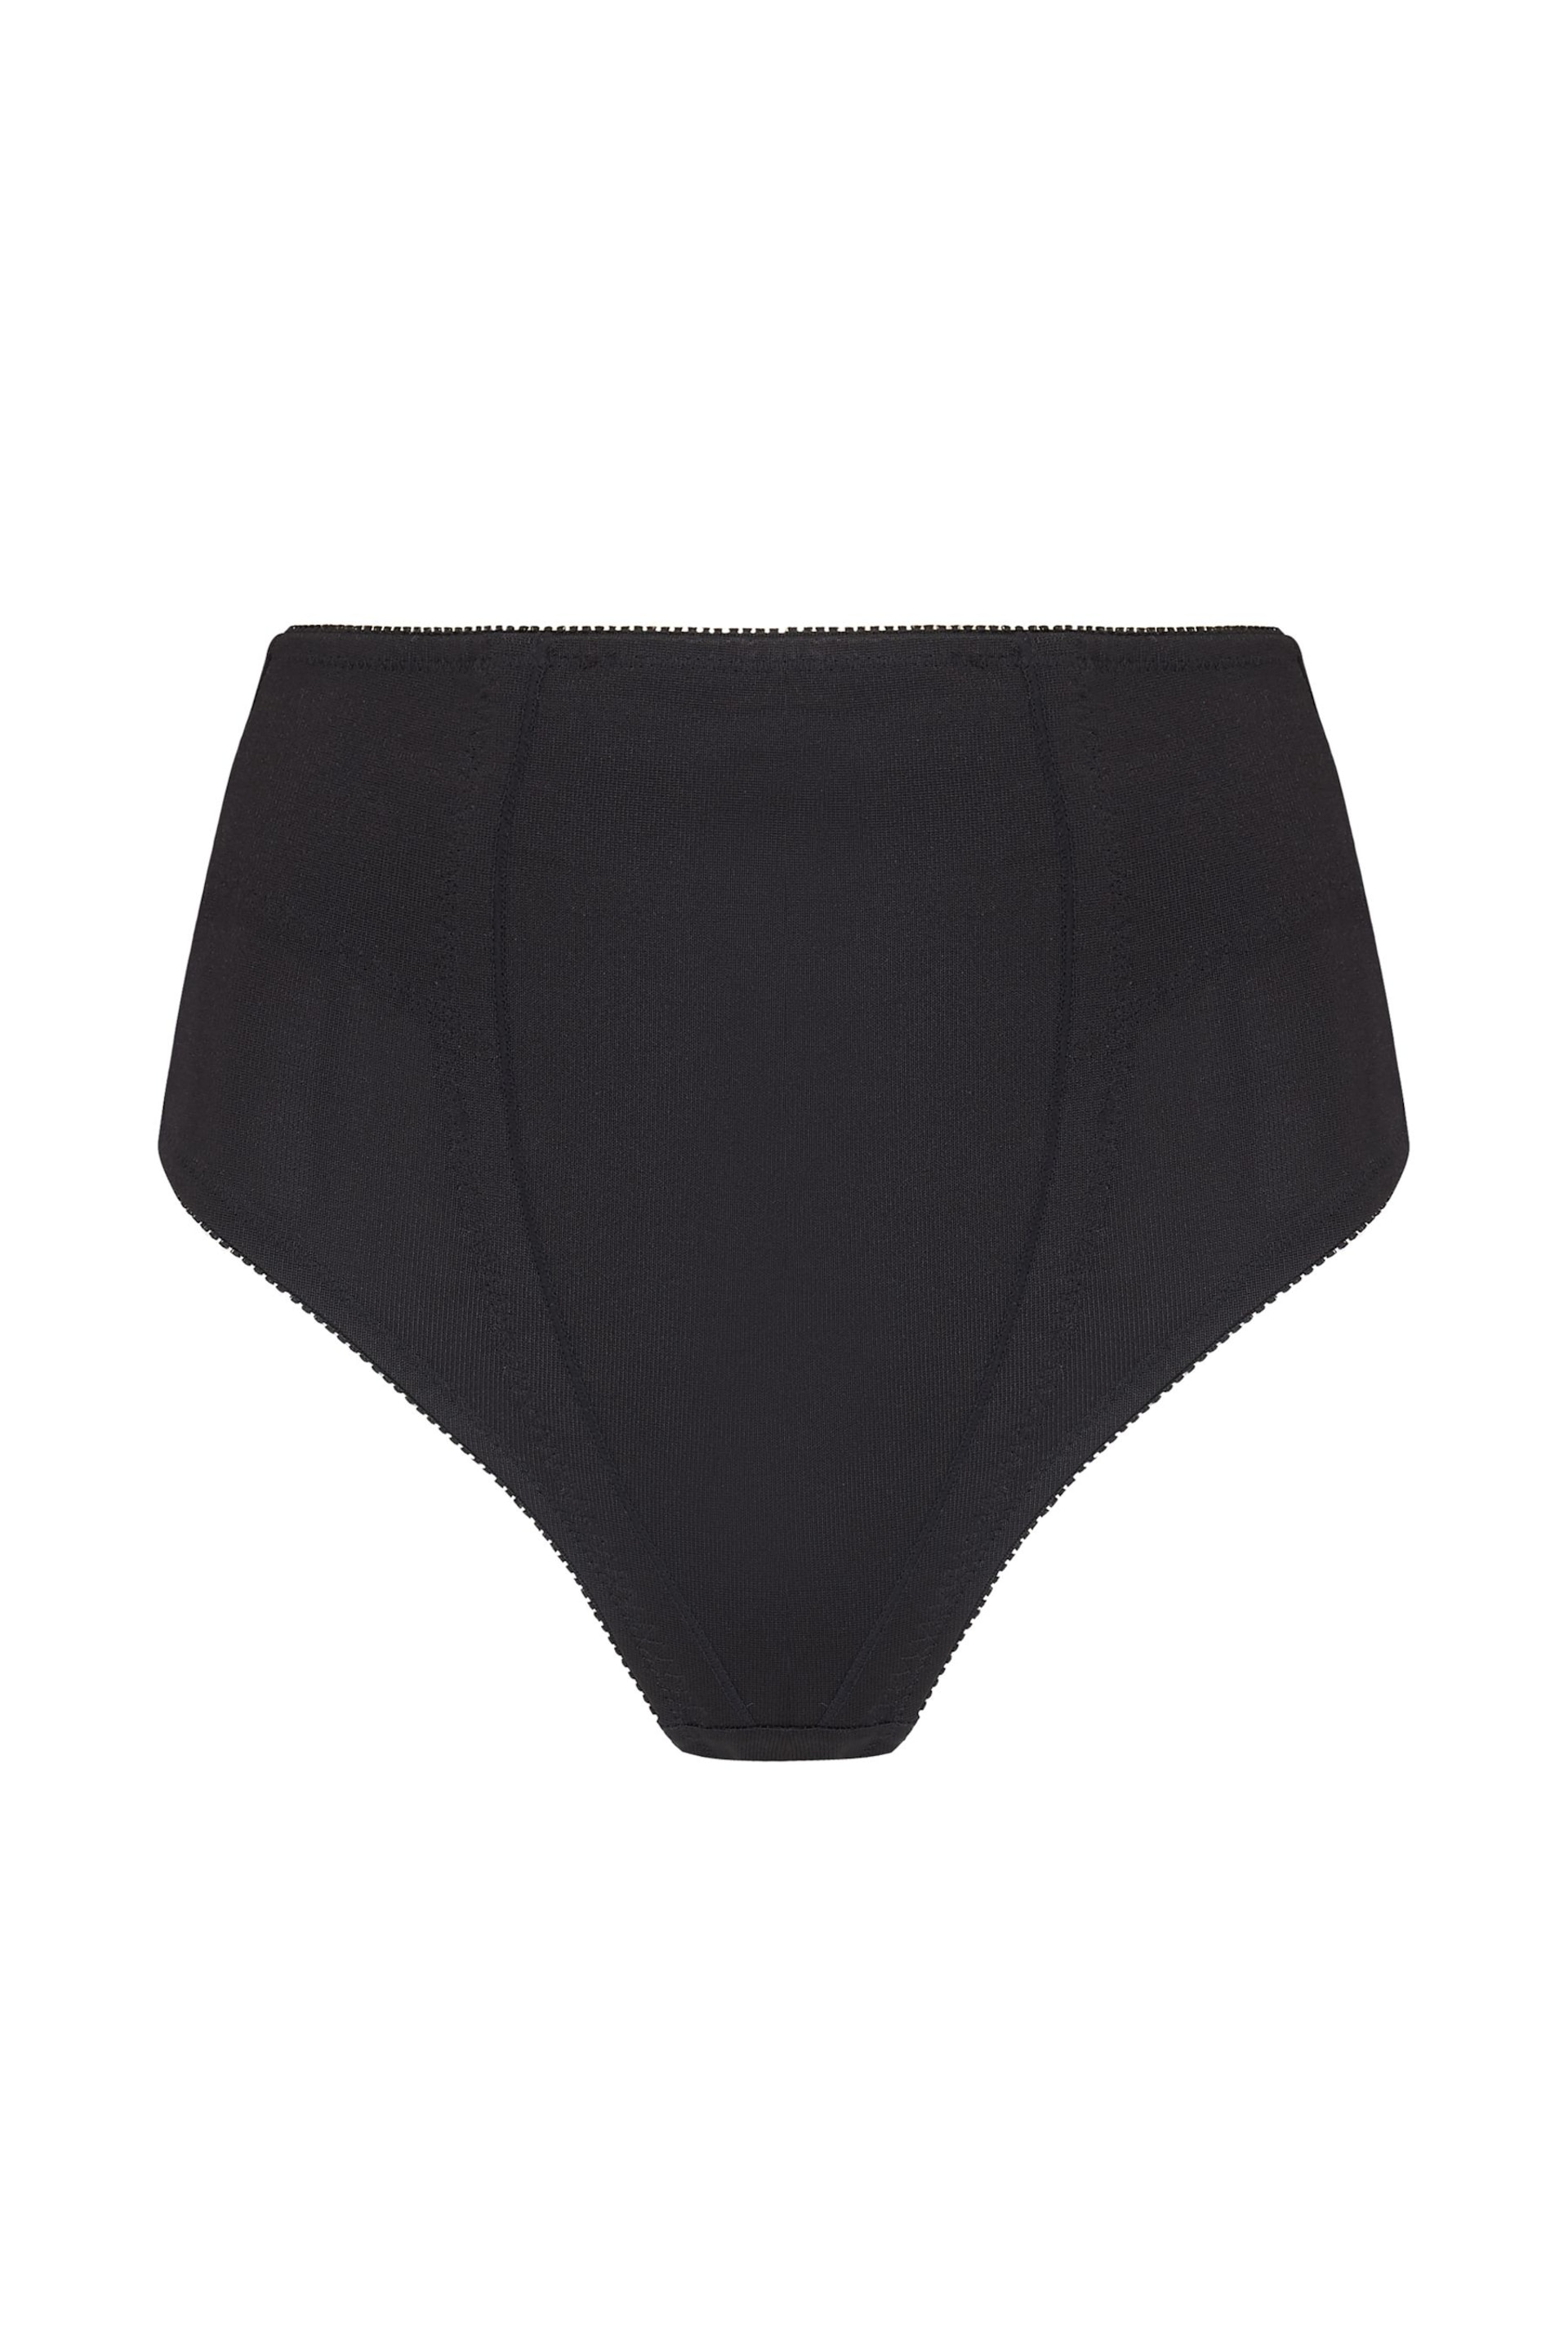 Pour Moi Black Hourglass Shapewear Firm Tummy Control Thong - Image 4 of 5